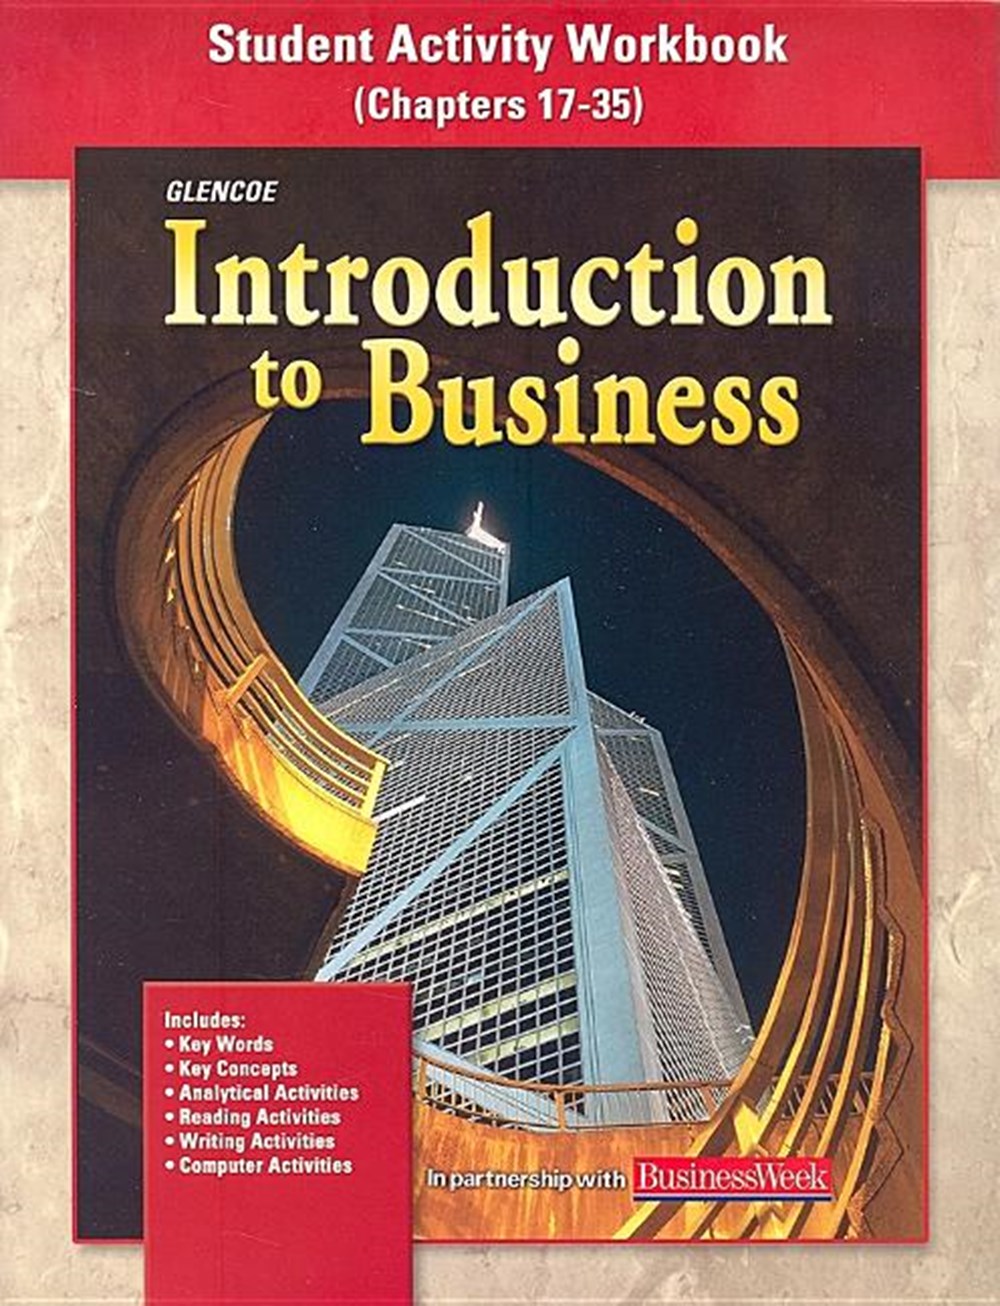 Introduction to Business, Student Activity Workbook Chapters 17-35